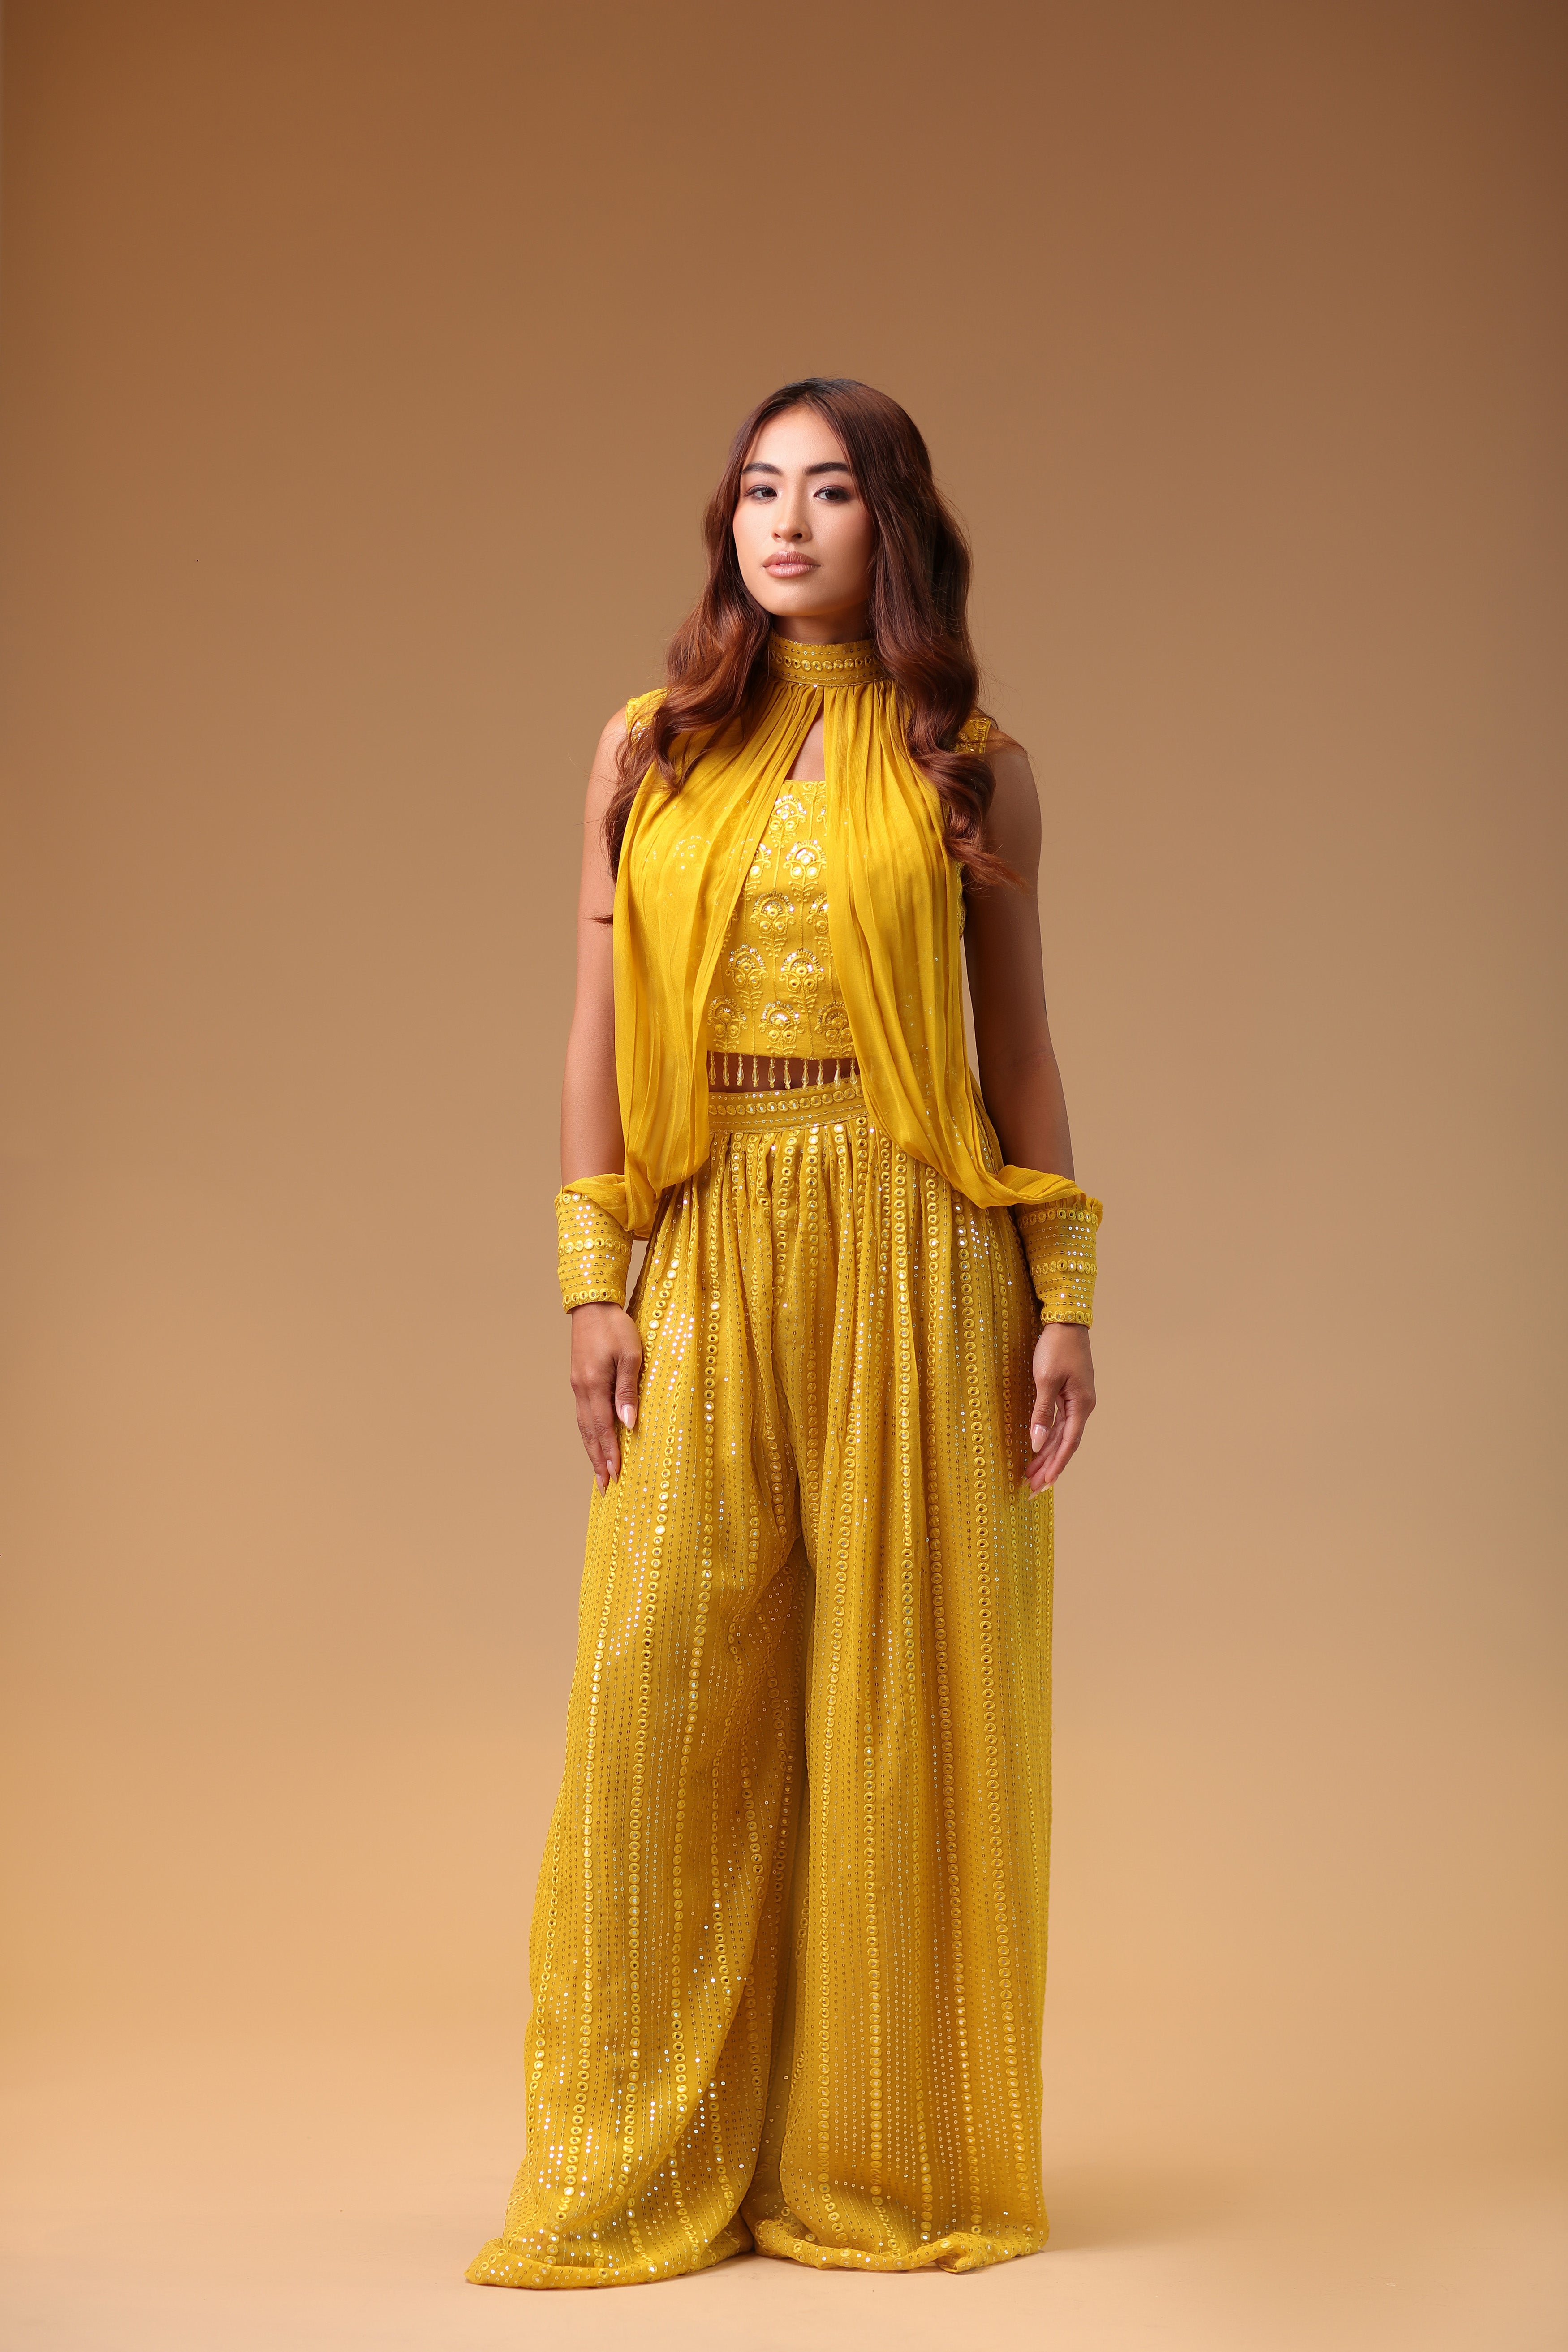 Fruity Ensemble of Sequined Sharara With Sleeveless CropTop And Slit Sleeves